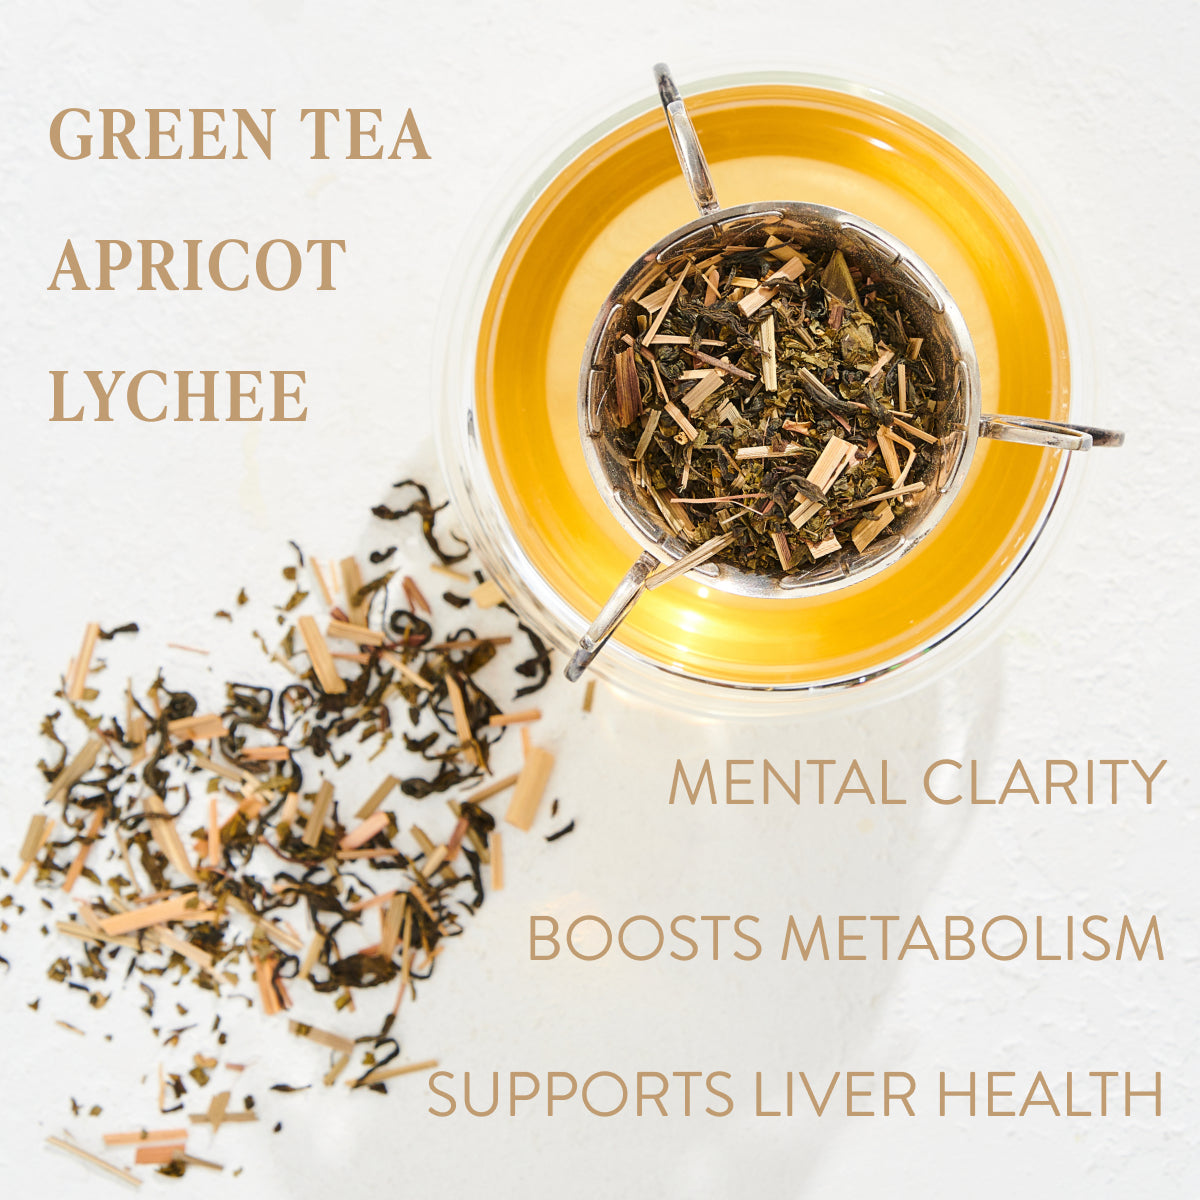 A glass teacup filled with Goddess Green Tea and apricot lychee blend. Loose leaf tea is scattered next to the cup on a white surface. Text on the image reads: "GODDESS GREEN TEA APRICOT LYCHEE MENTAL CLARITY BOOSTS METABOLISM SUPPORTS LIVER HEALTH." Experience the Magic Hour with organic tea blends.